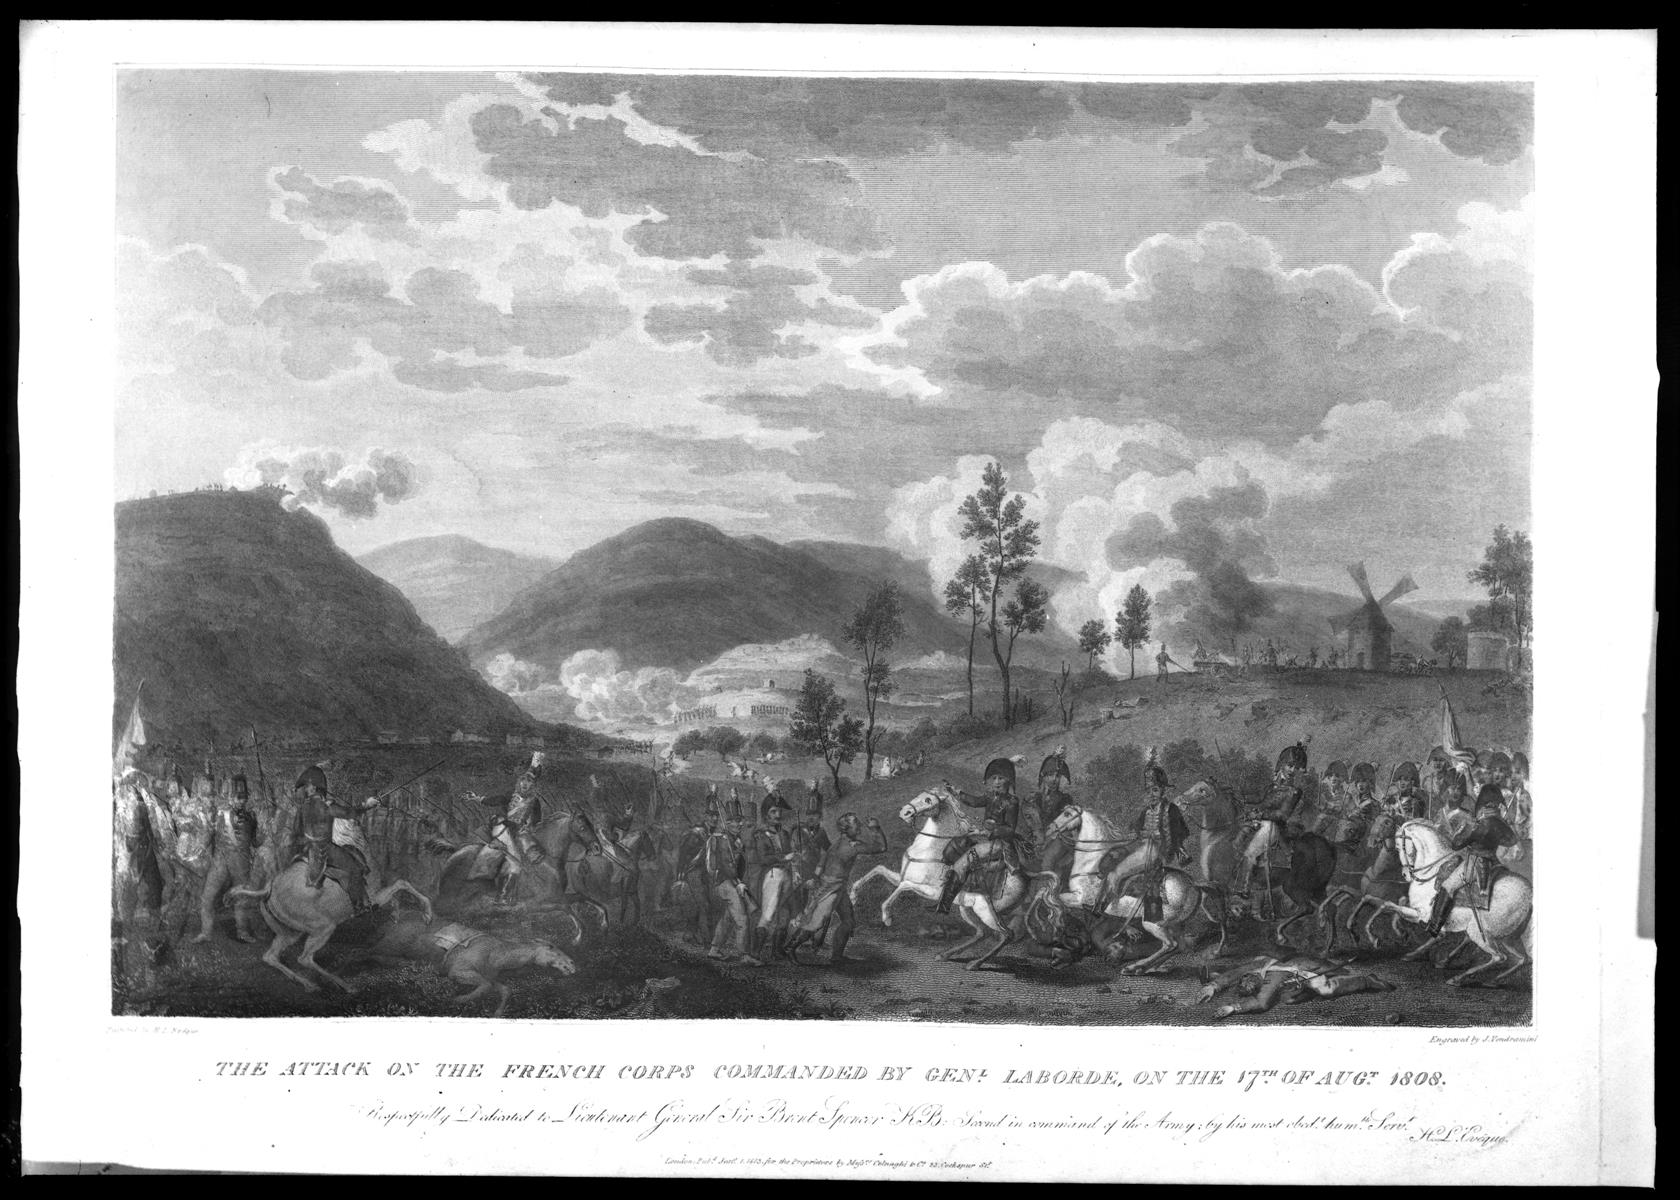 The attack on the french corps commanded by General Laborde, on the 17th of August 1808